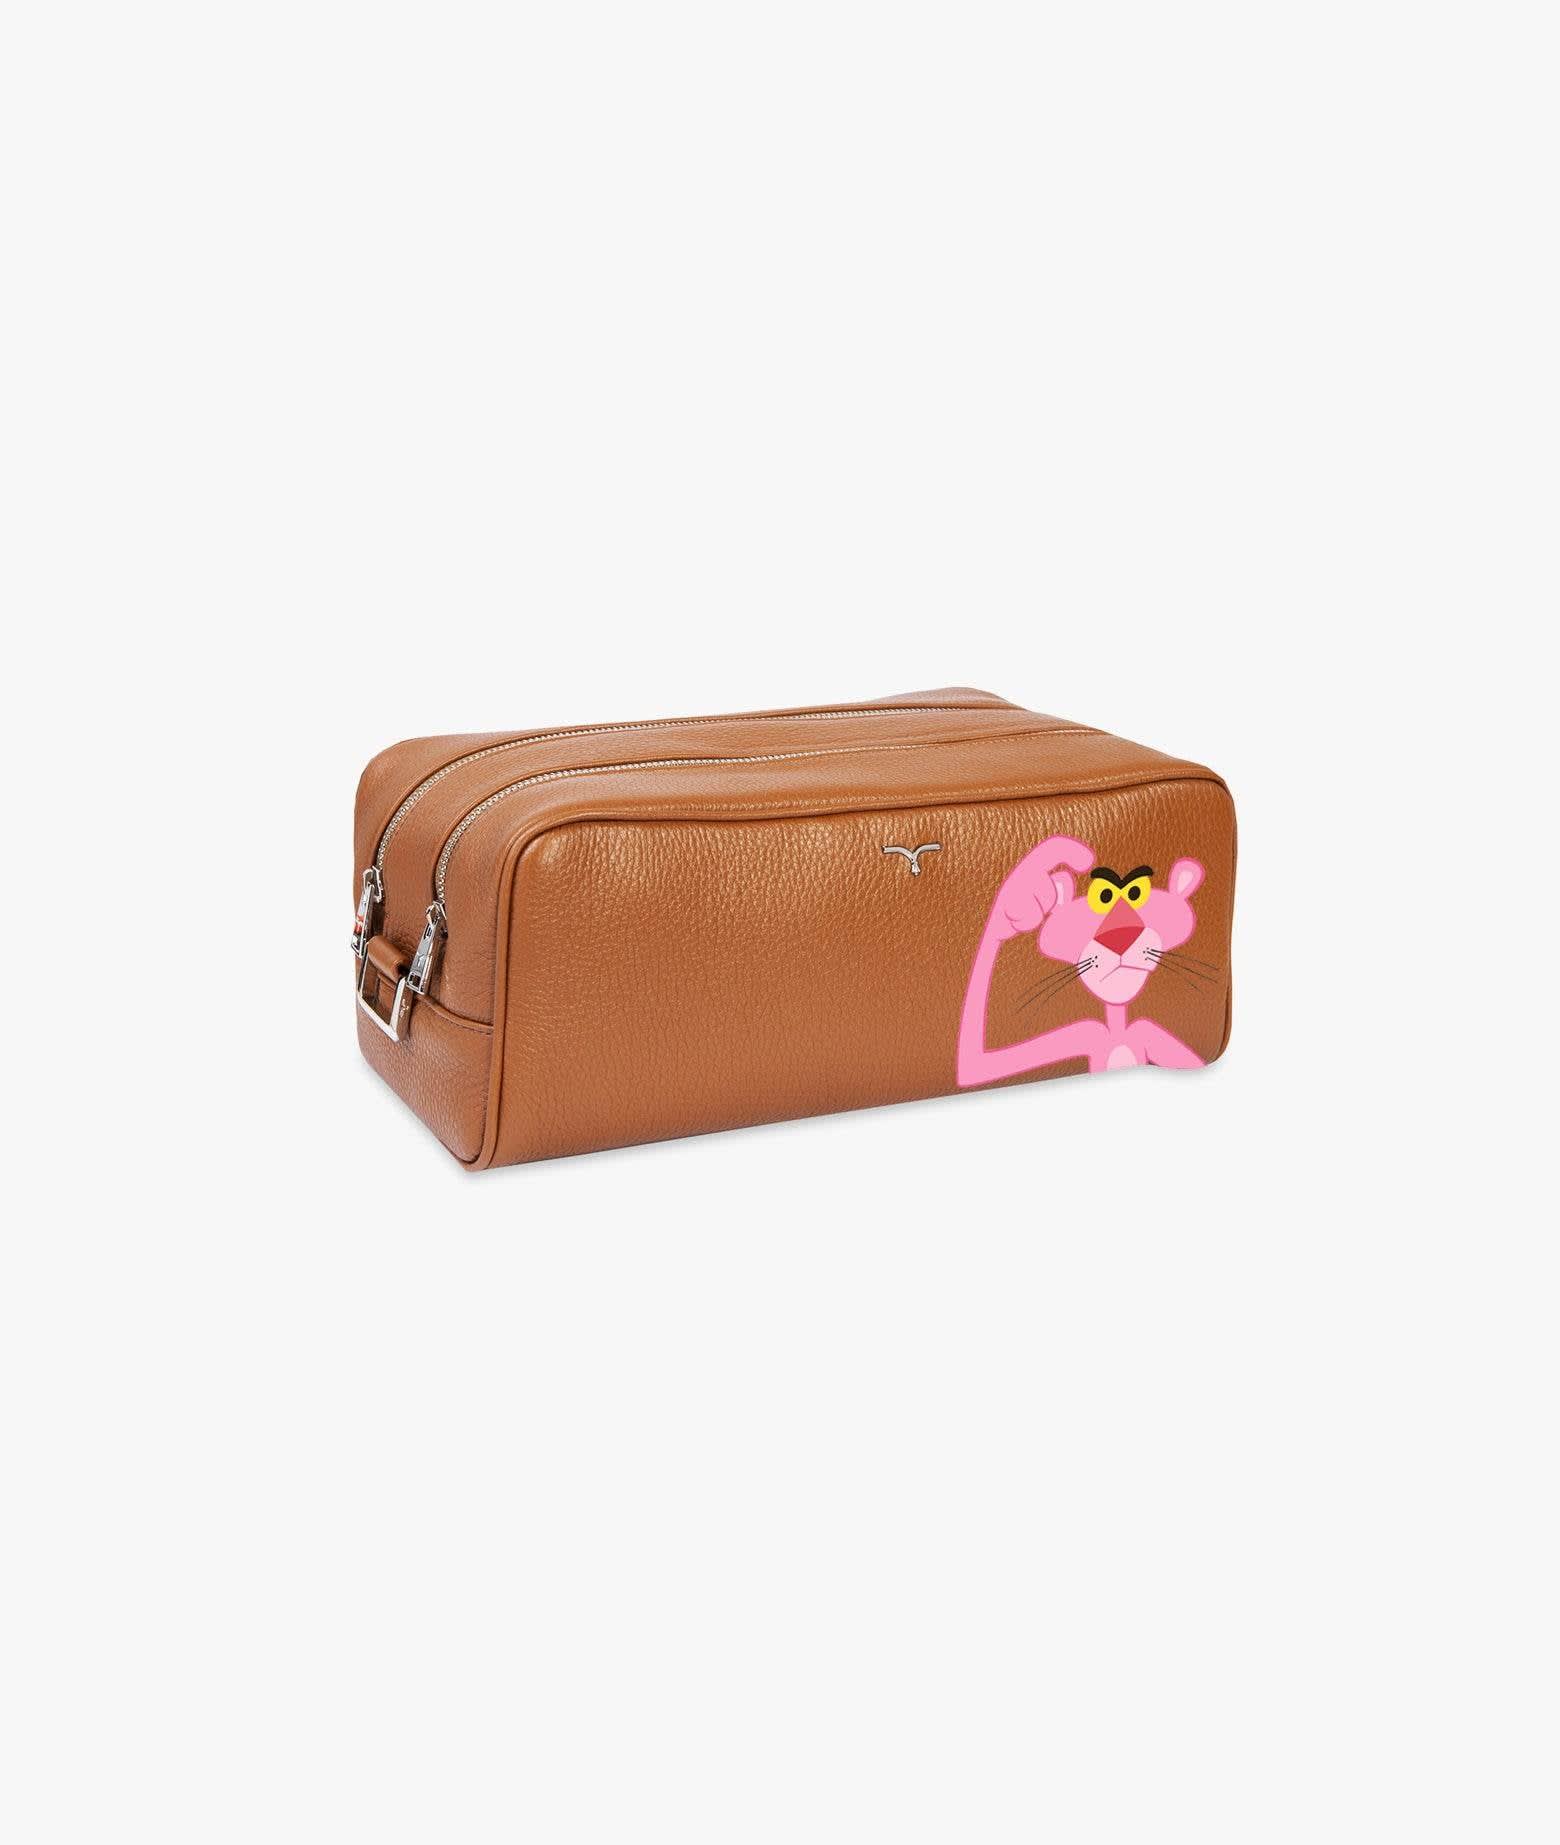 Nécessaire pink Panther Luggage